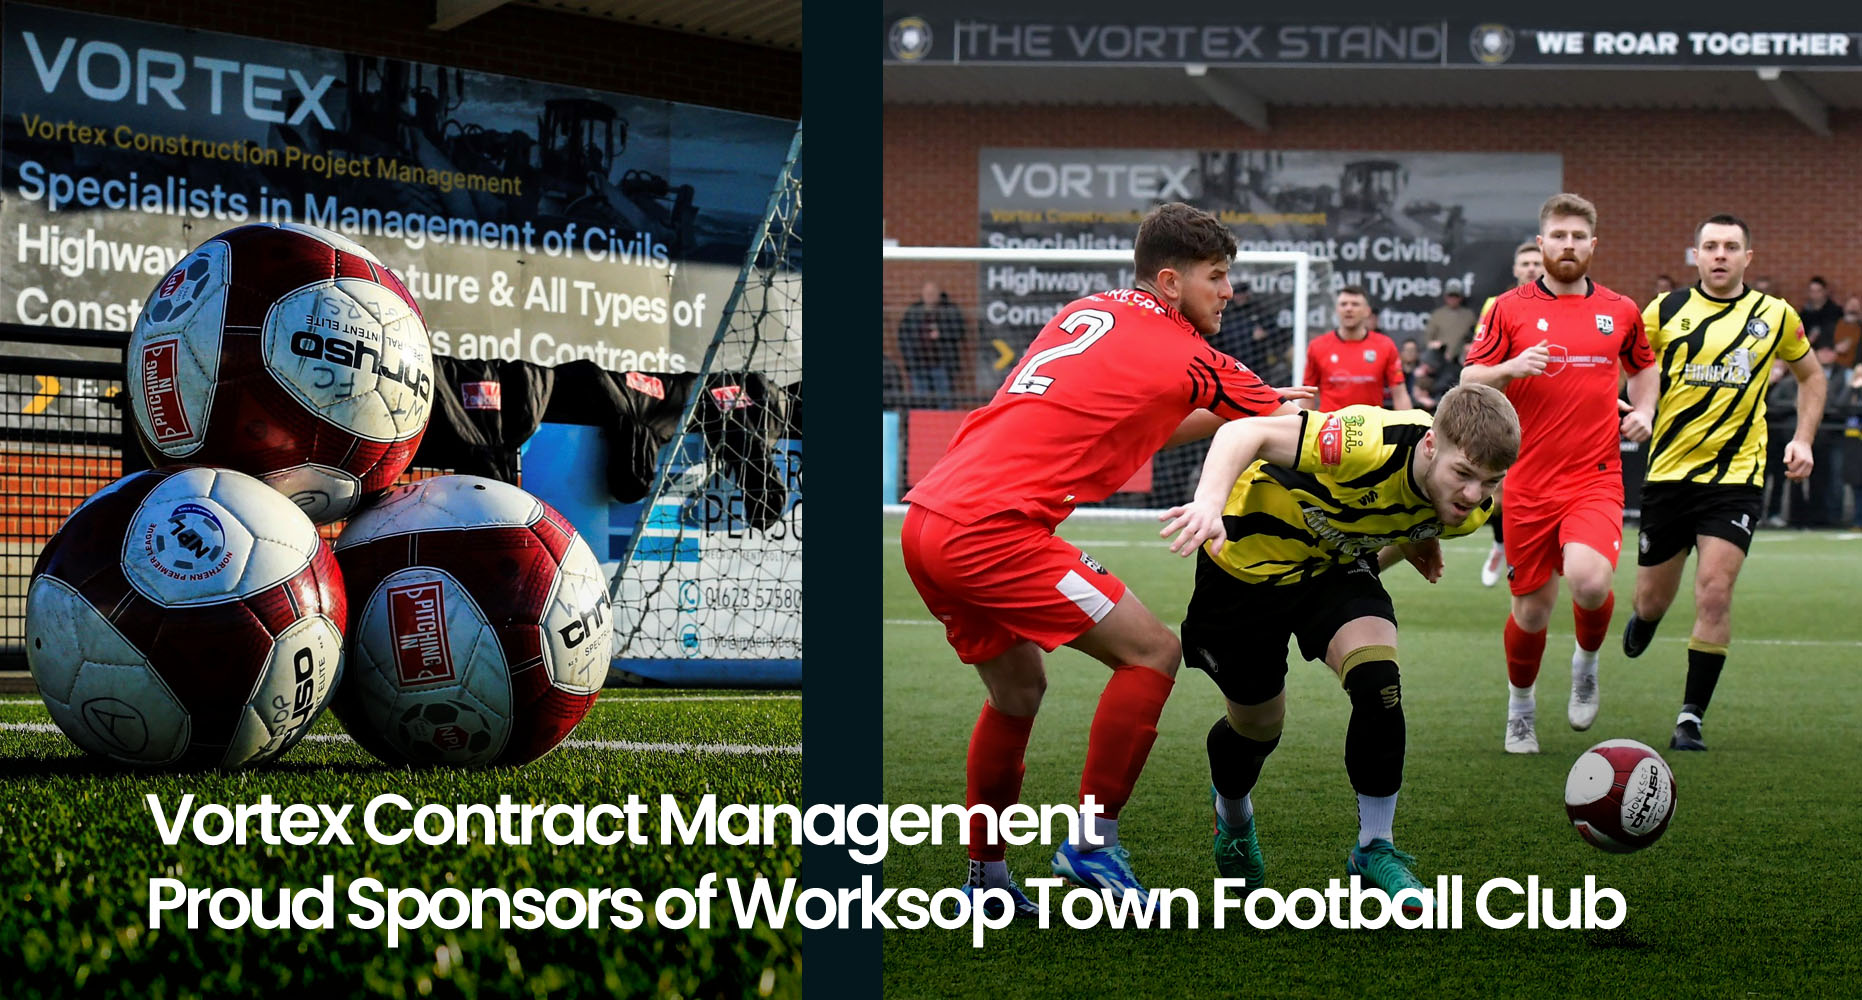 Vortex Contract Management - proud sponsors of Worksop Town Football Club 